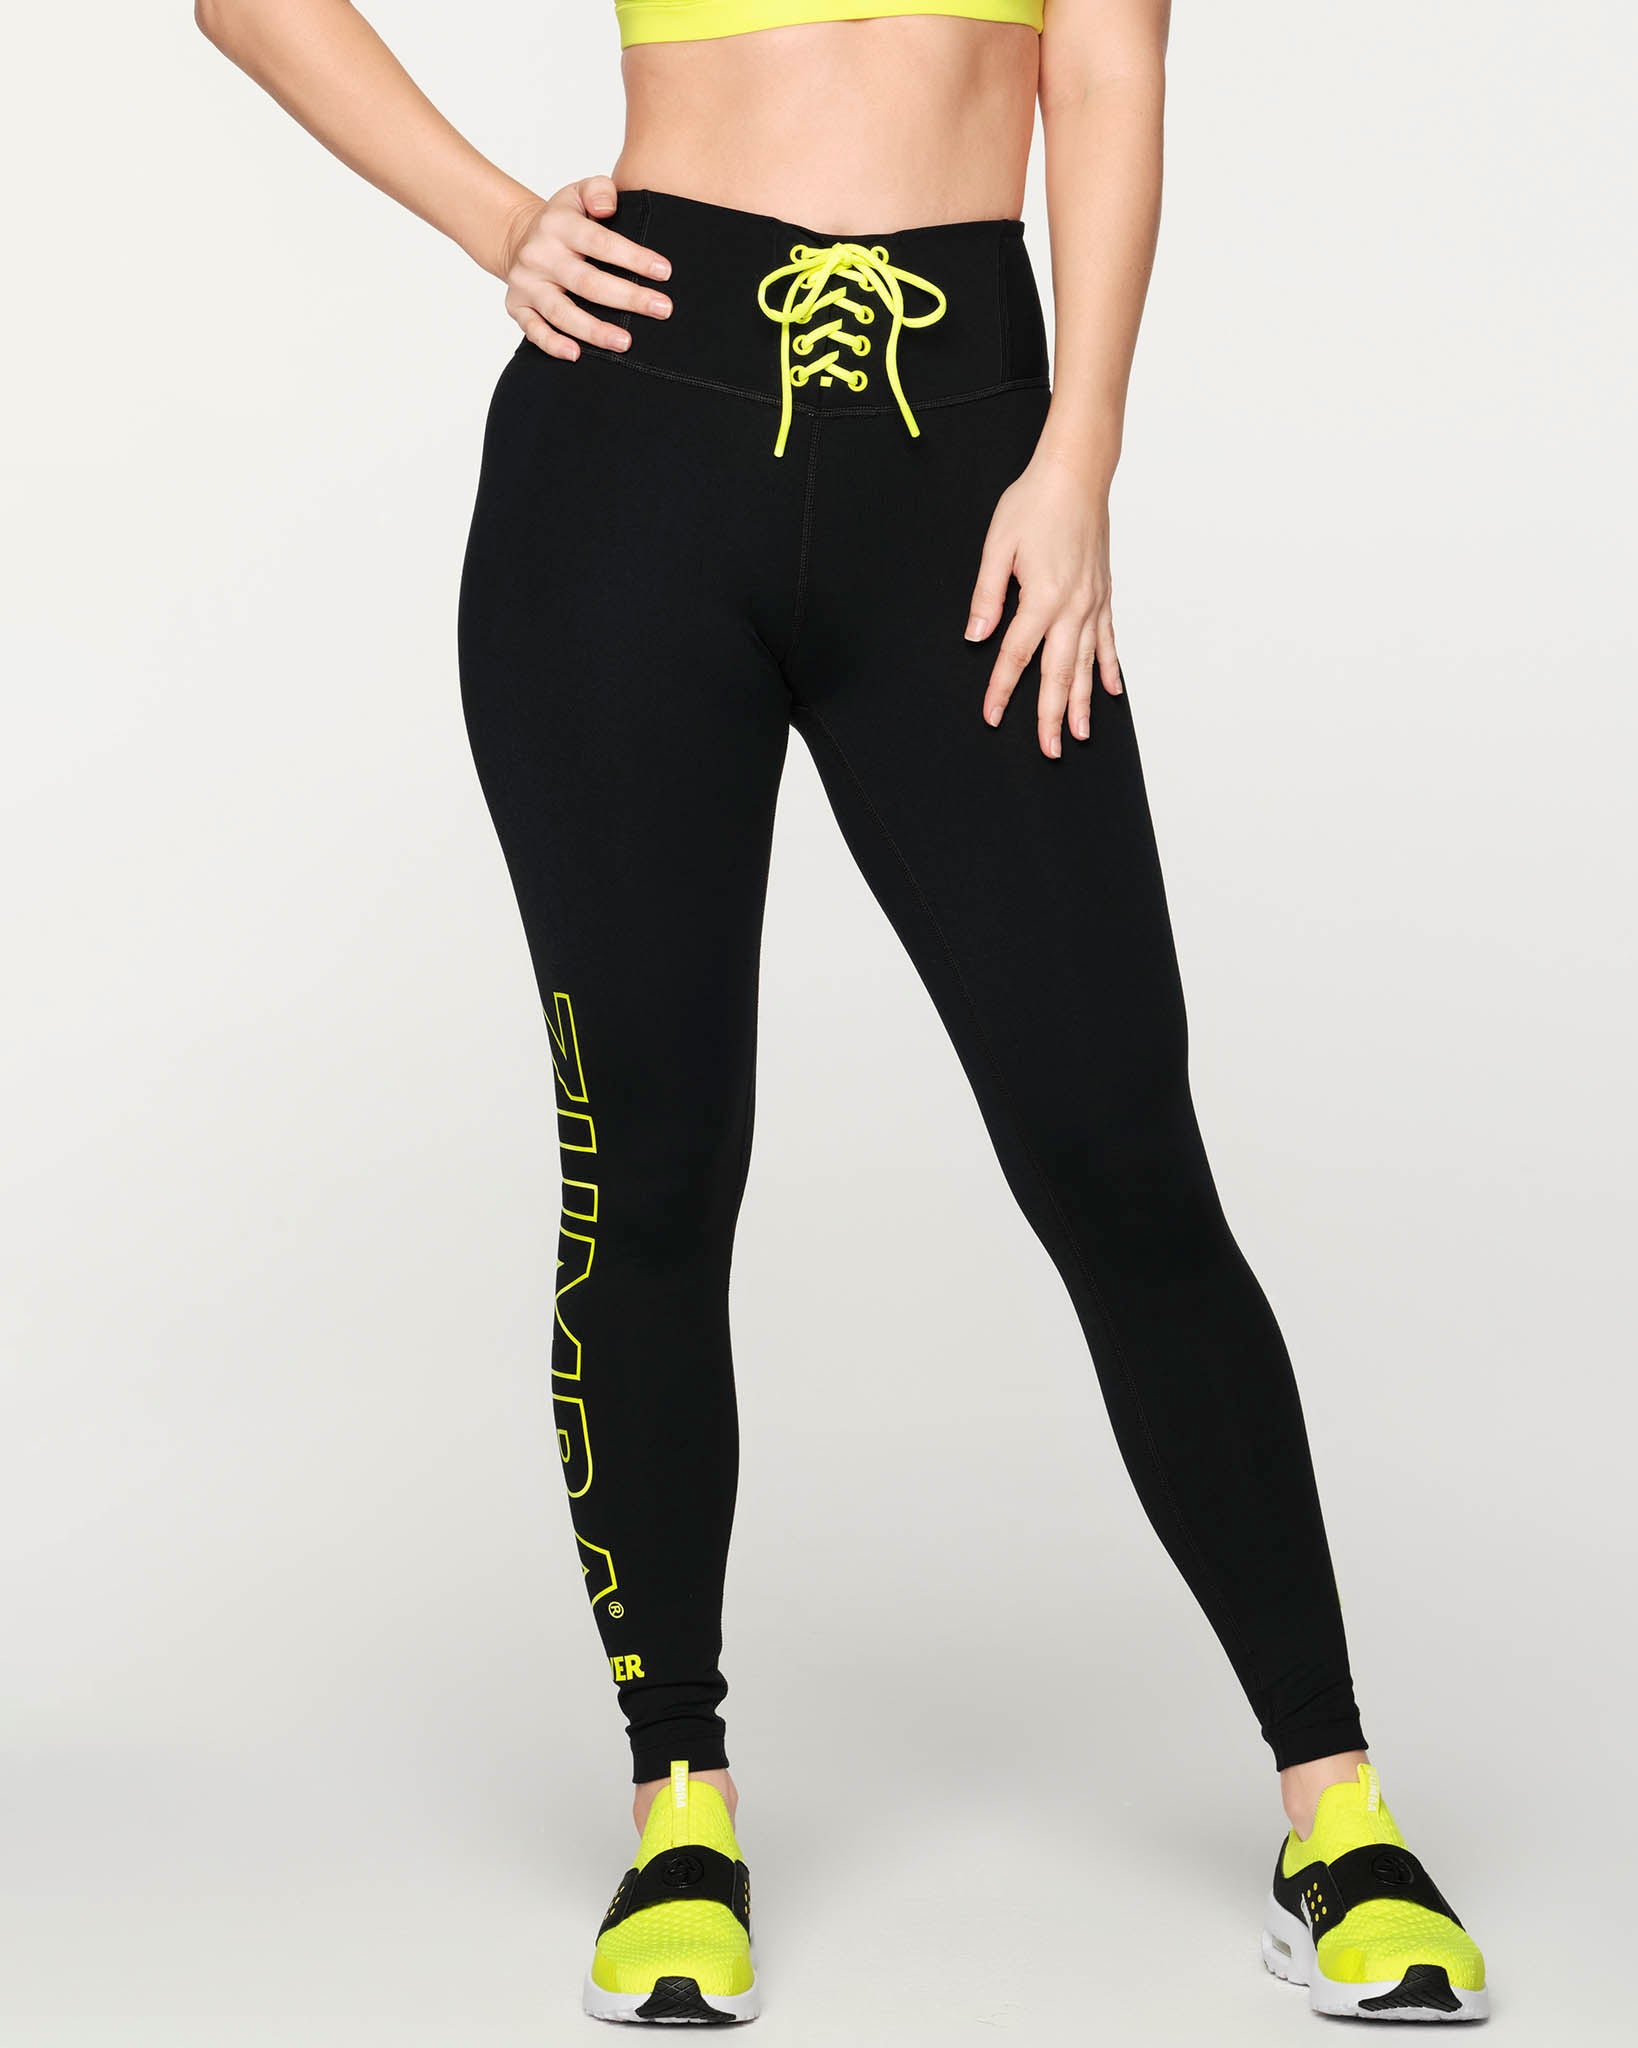 Retro Zumba High Waist Lace-Up Leggings: Functional lace-up